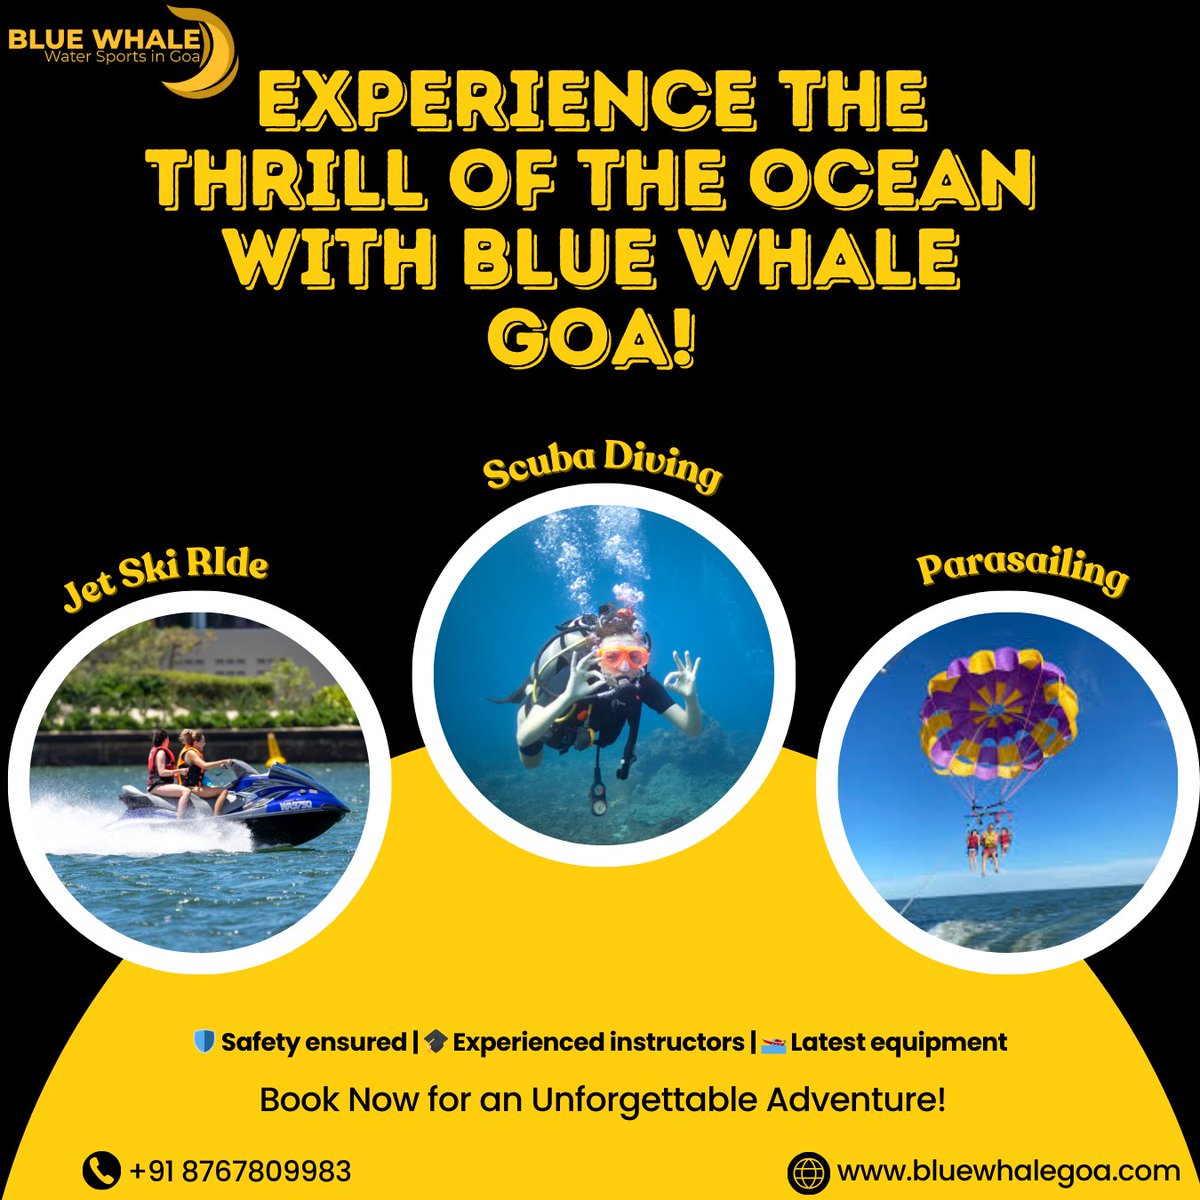 Discover the thrill of Goa's coastline with Blue Whale Goa! 🌊 Offering scuba diving, jet skiing, parasailing, and more. Safety, expert instructors, and top equipment guaranteed. Book now! 📞 +91 8767809983 🐳 #BlueWhaleGoa #WaterSports #Adventure